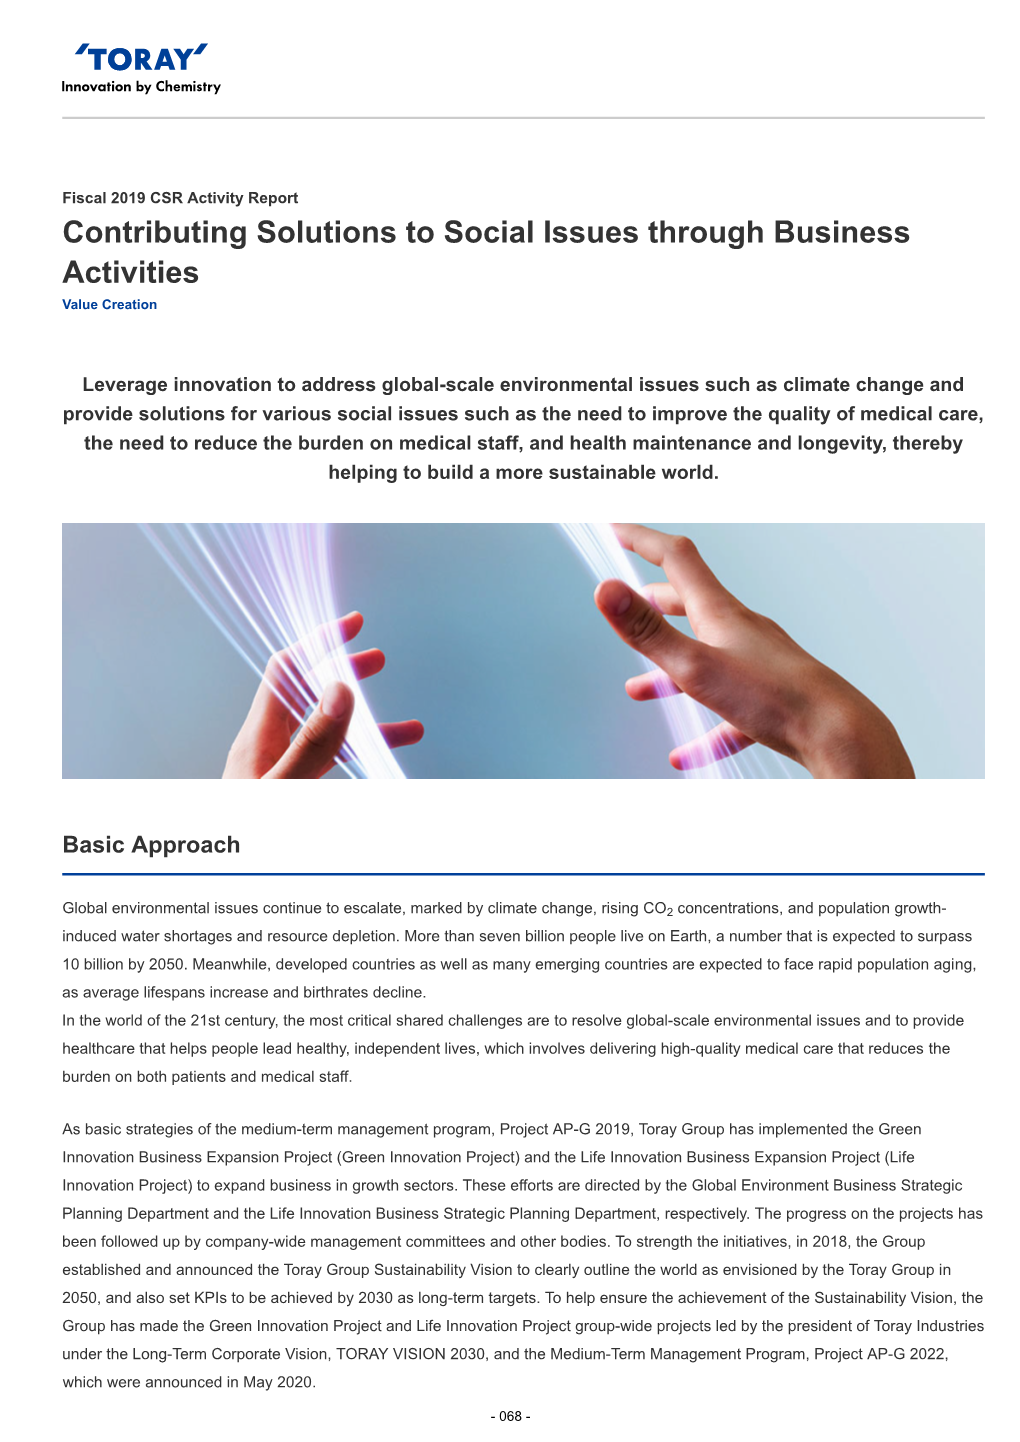 Contributing Solutions to Social Issues Through Business Activities